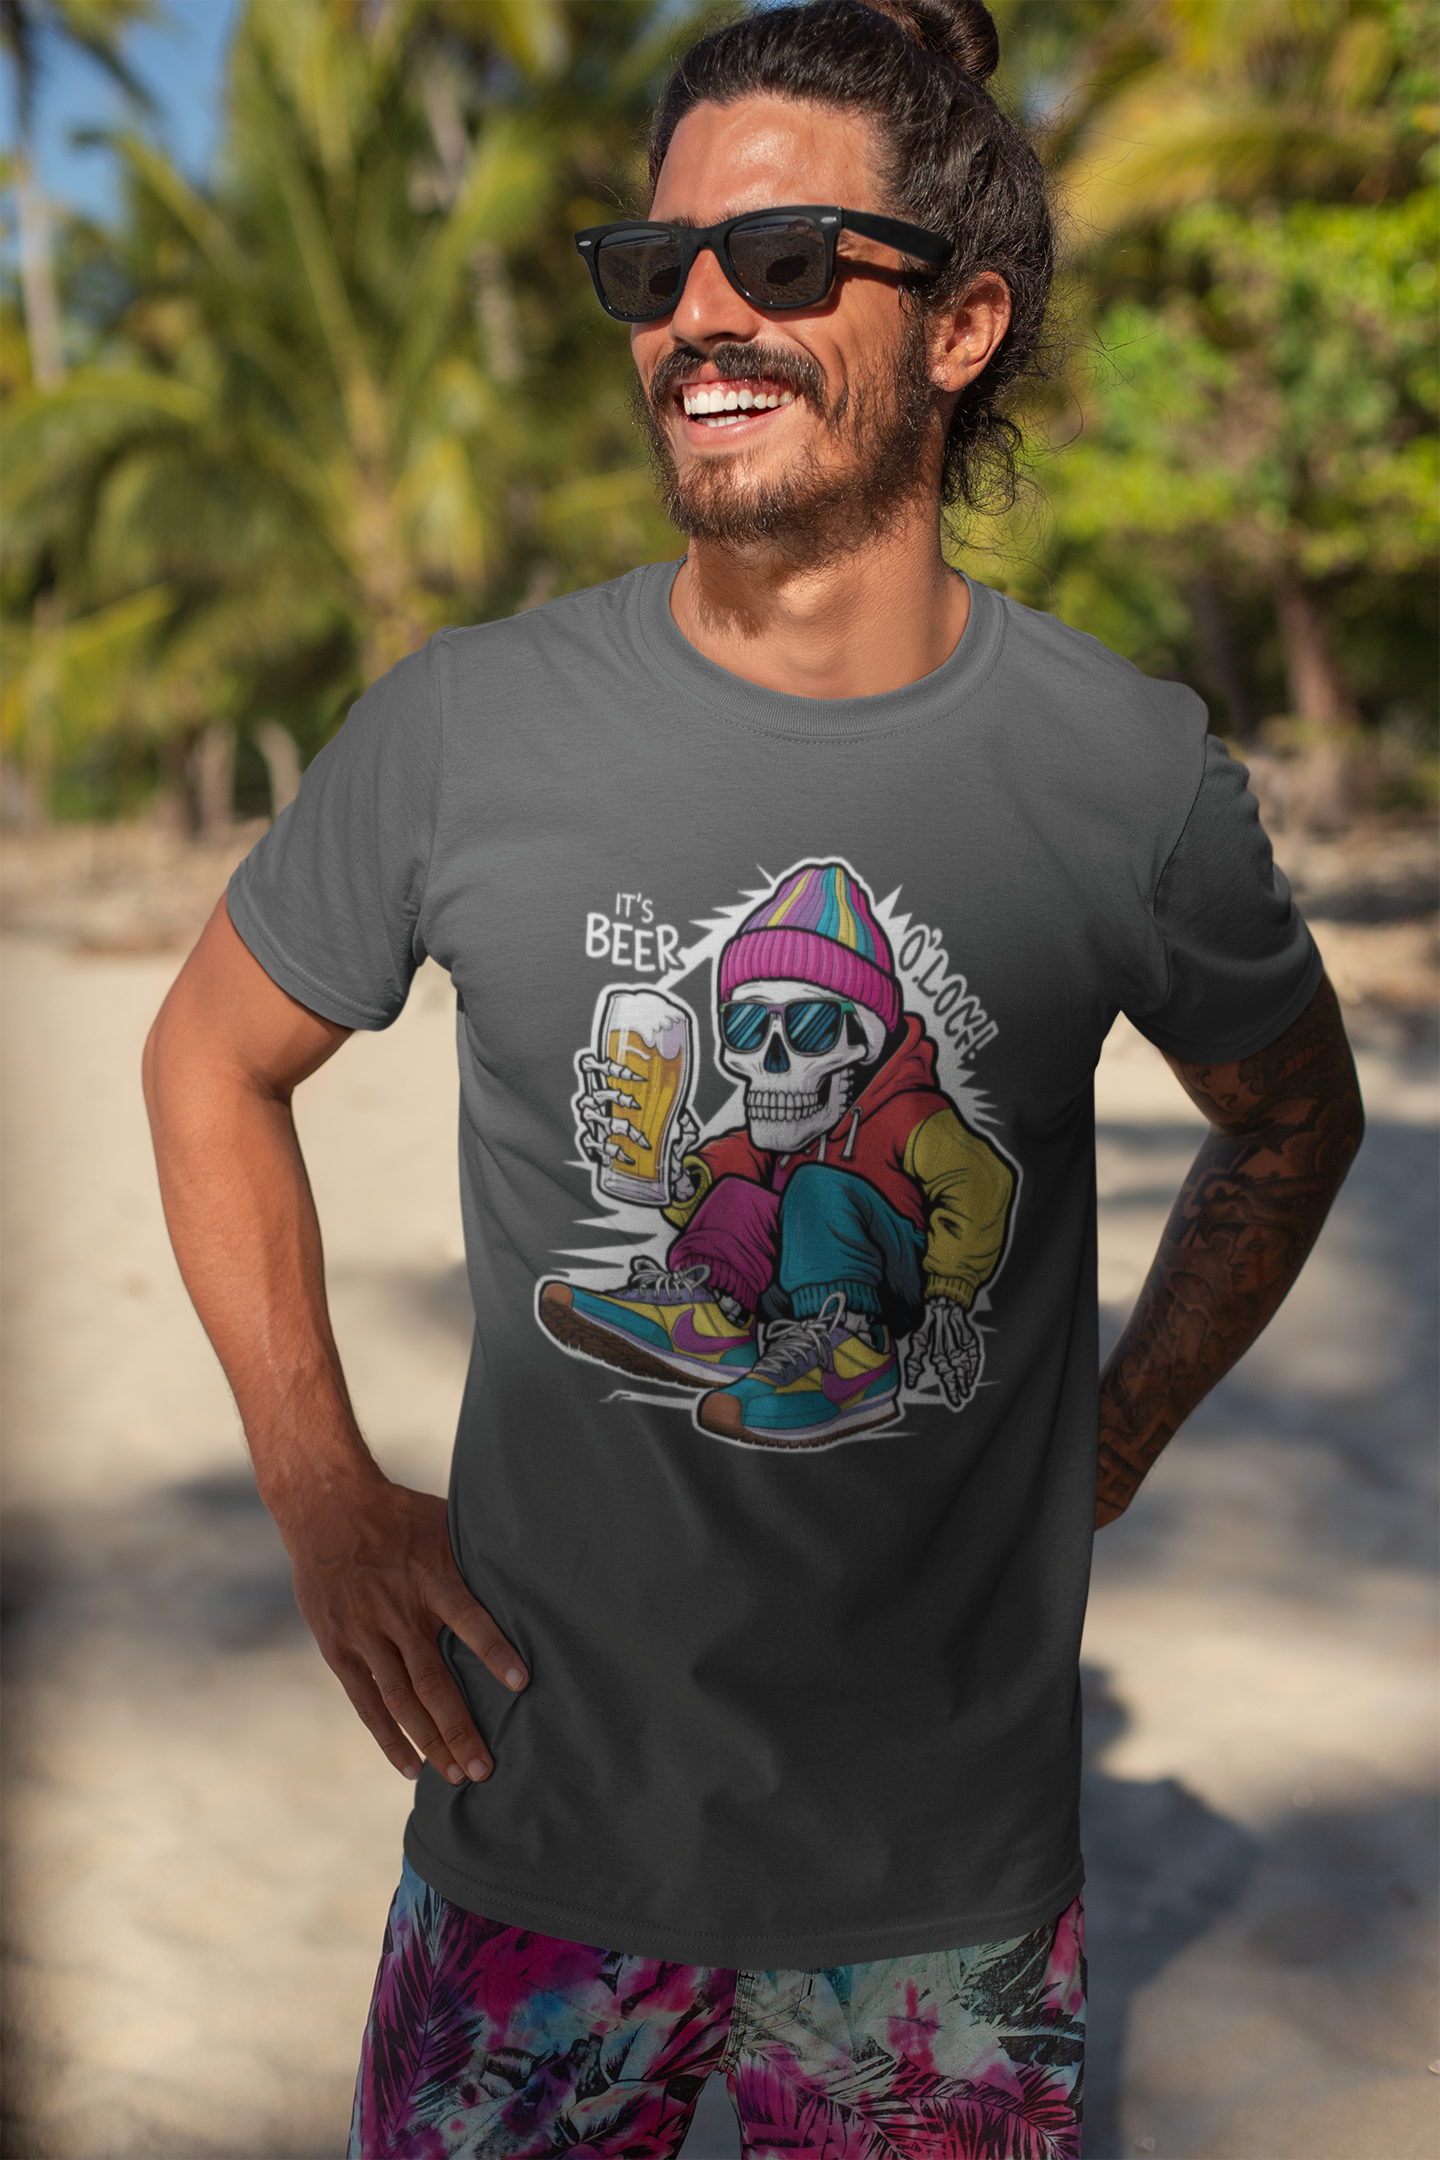 💀 "Chill to the Bone" Craft Beer Enthusiast T-Shirt